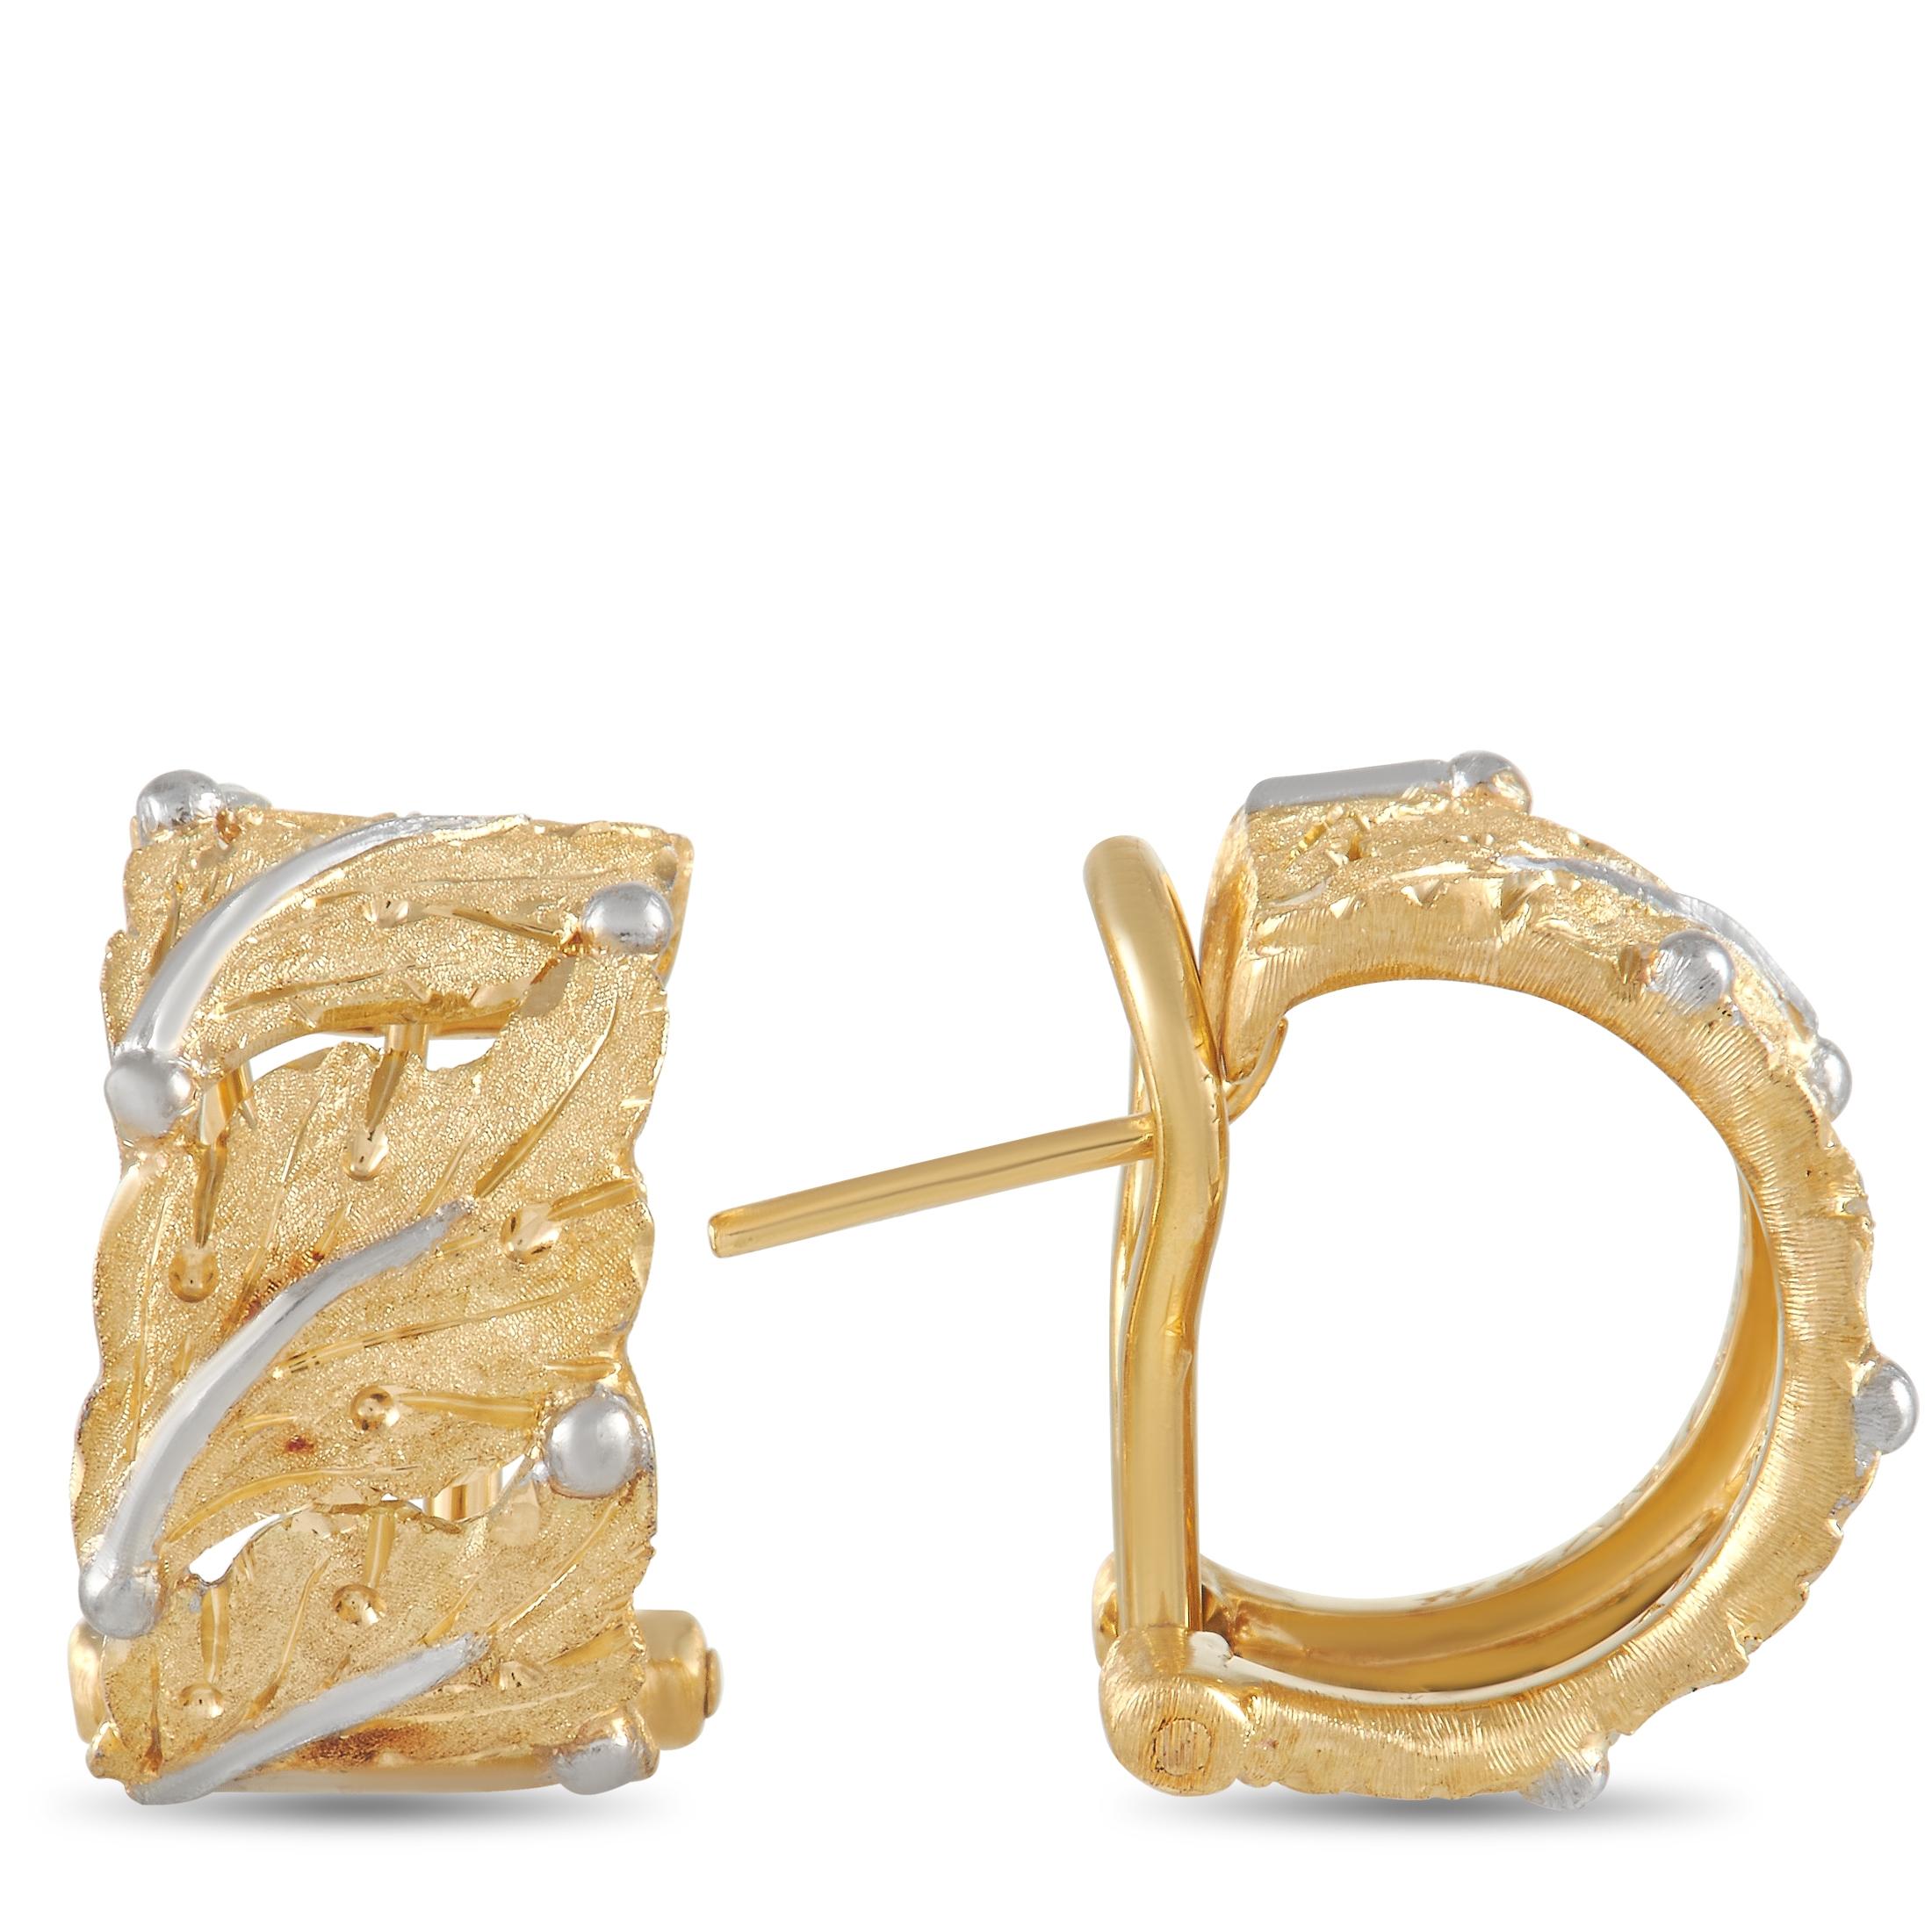 Organic forms and a multitude of textures come together in perfect harmony on these stunning Buccellati earrings. Shimmering 18K white gold is beautifully juxtaposed with lustrous 18K yellow gold, while artistic leaf motifs make them endlessly